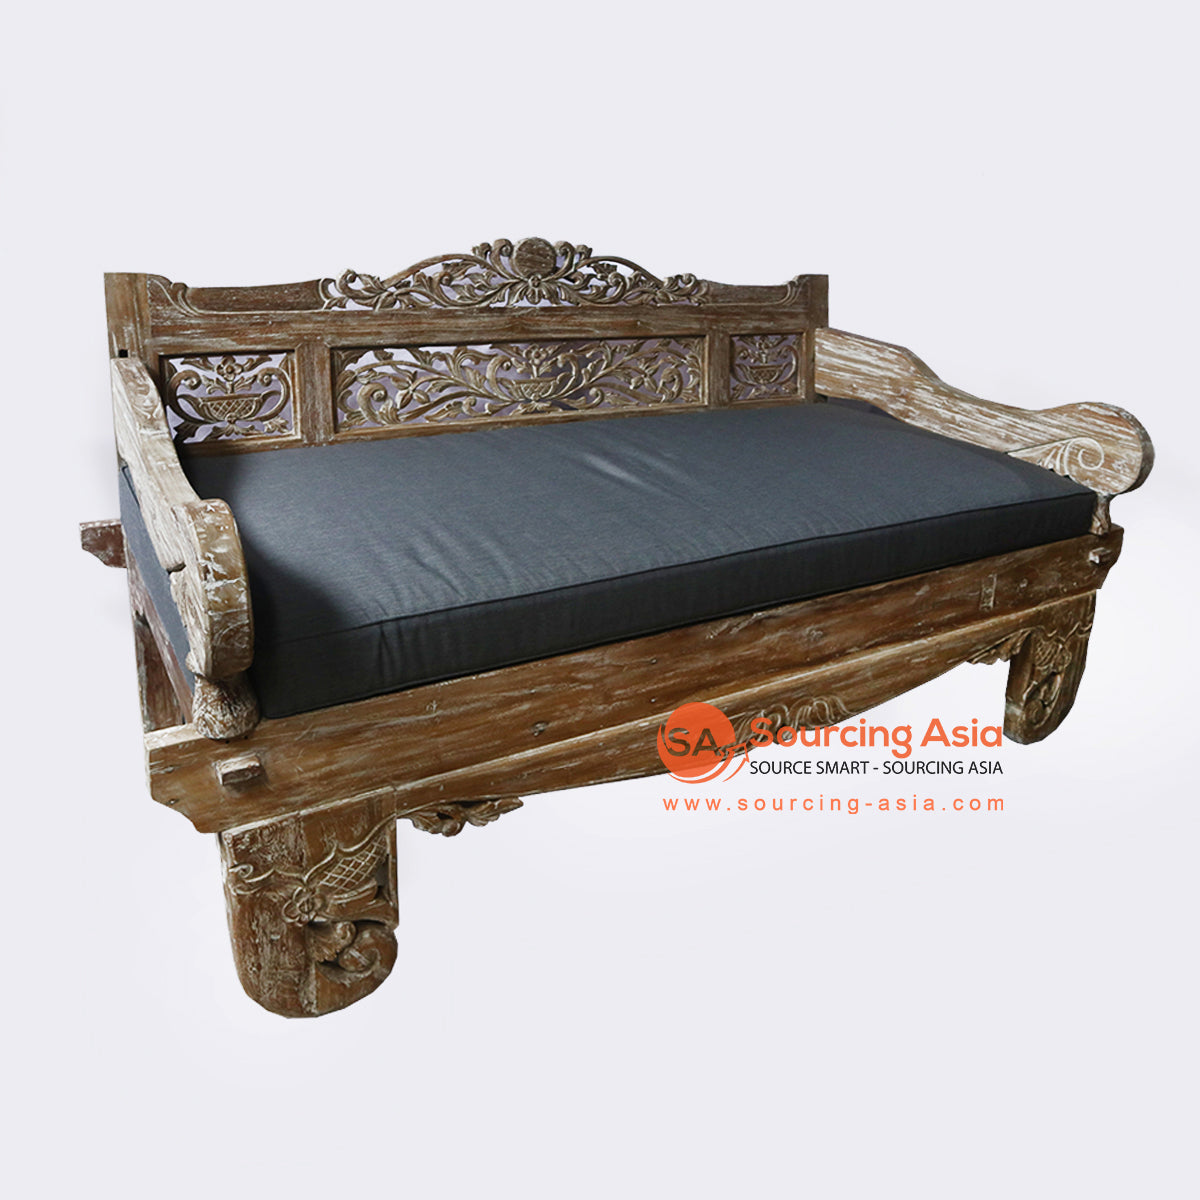 LAC079 NATURAL TEAK WOOD CARVED DAYBED